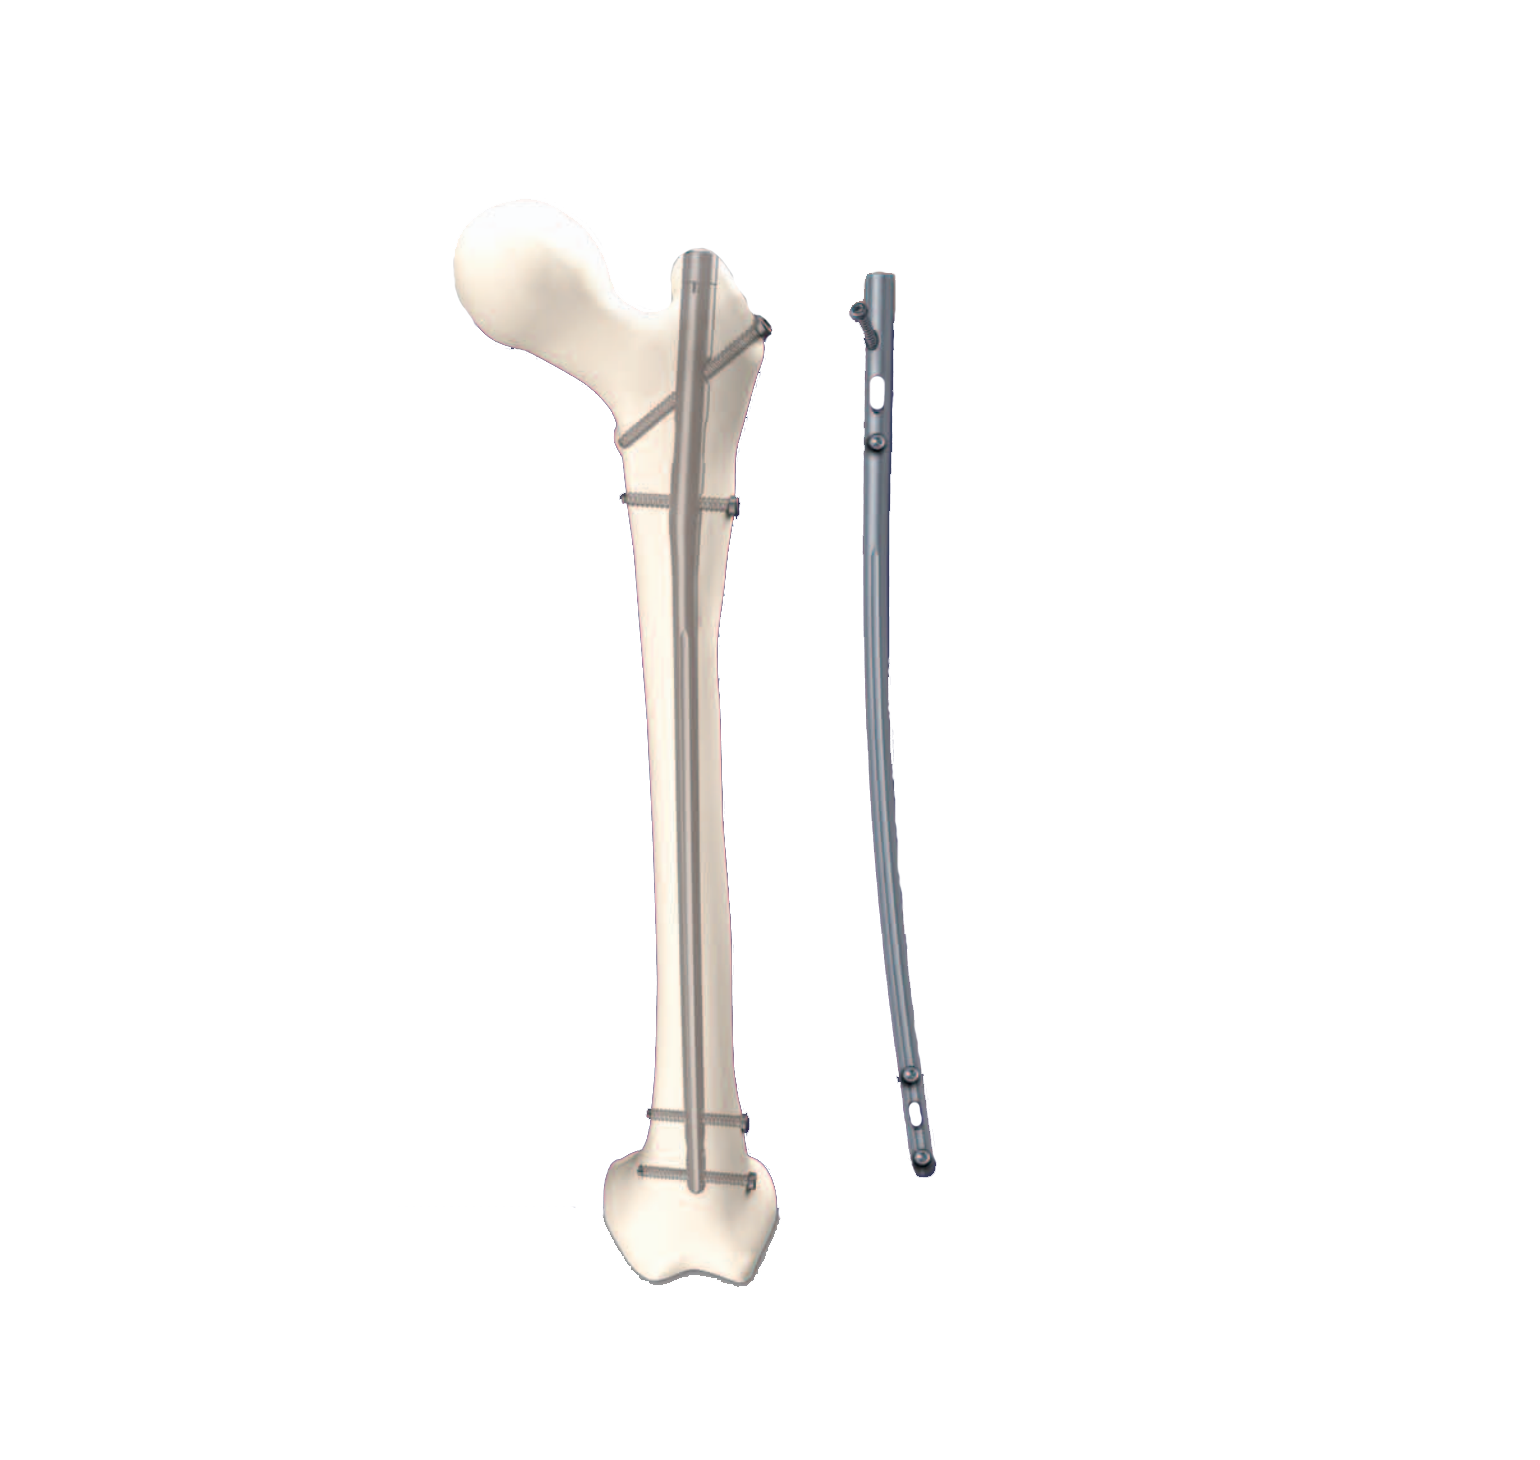 T2 Greater Trochanter Entry Nailing System | ​The T2 Greater Trochanter Entry Nailing (GTN) System is designed for the treatment of femoral shaft fractures.